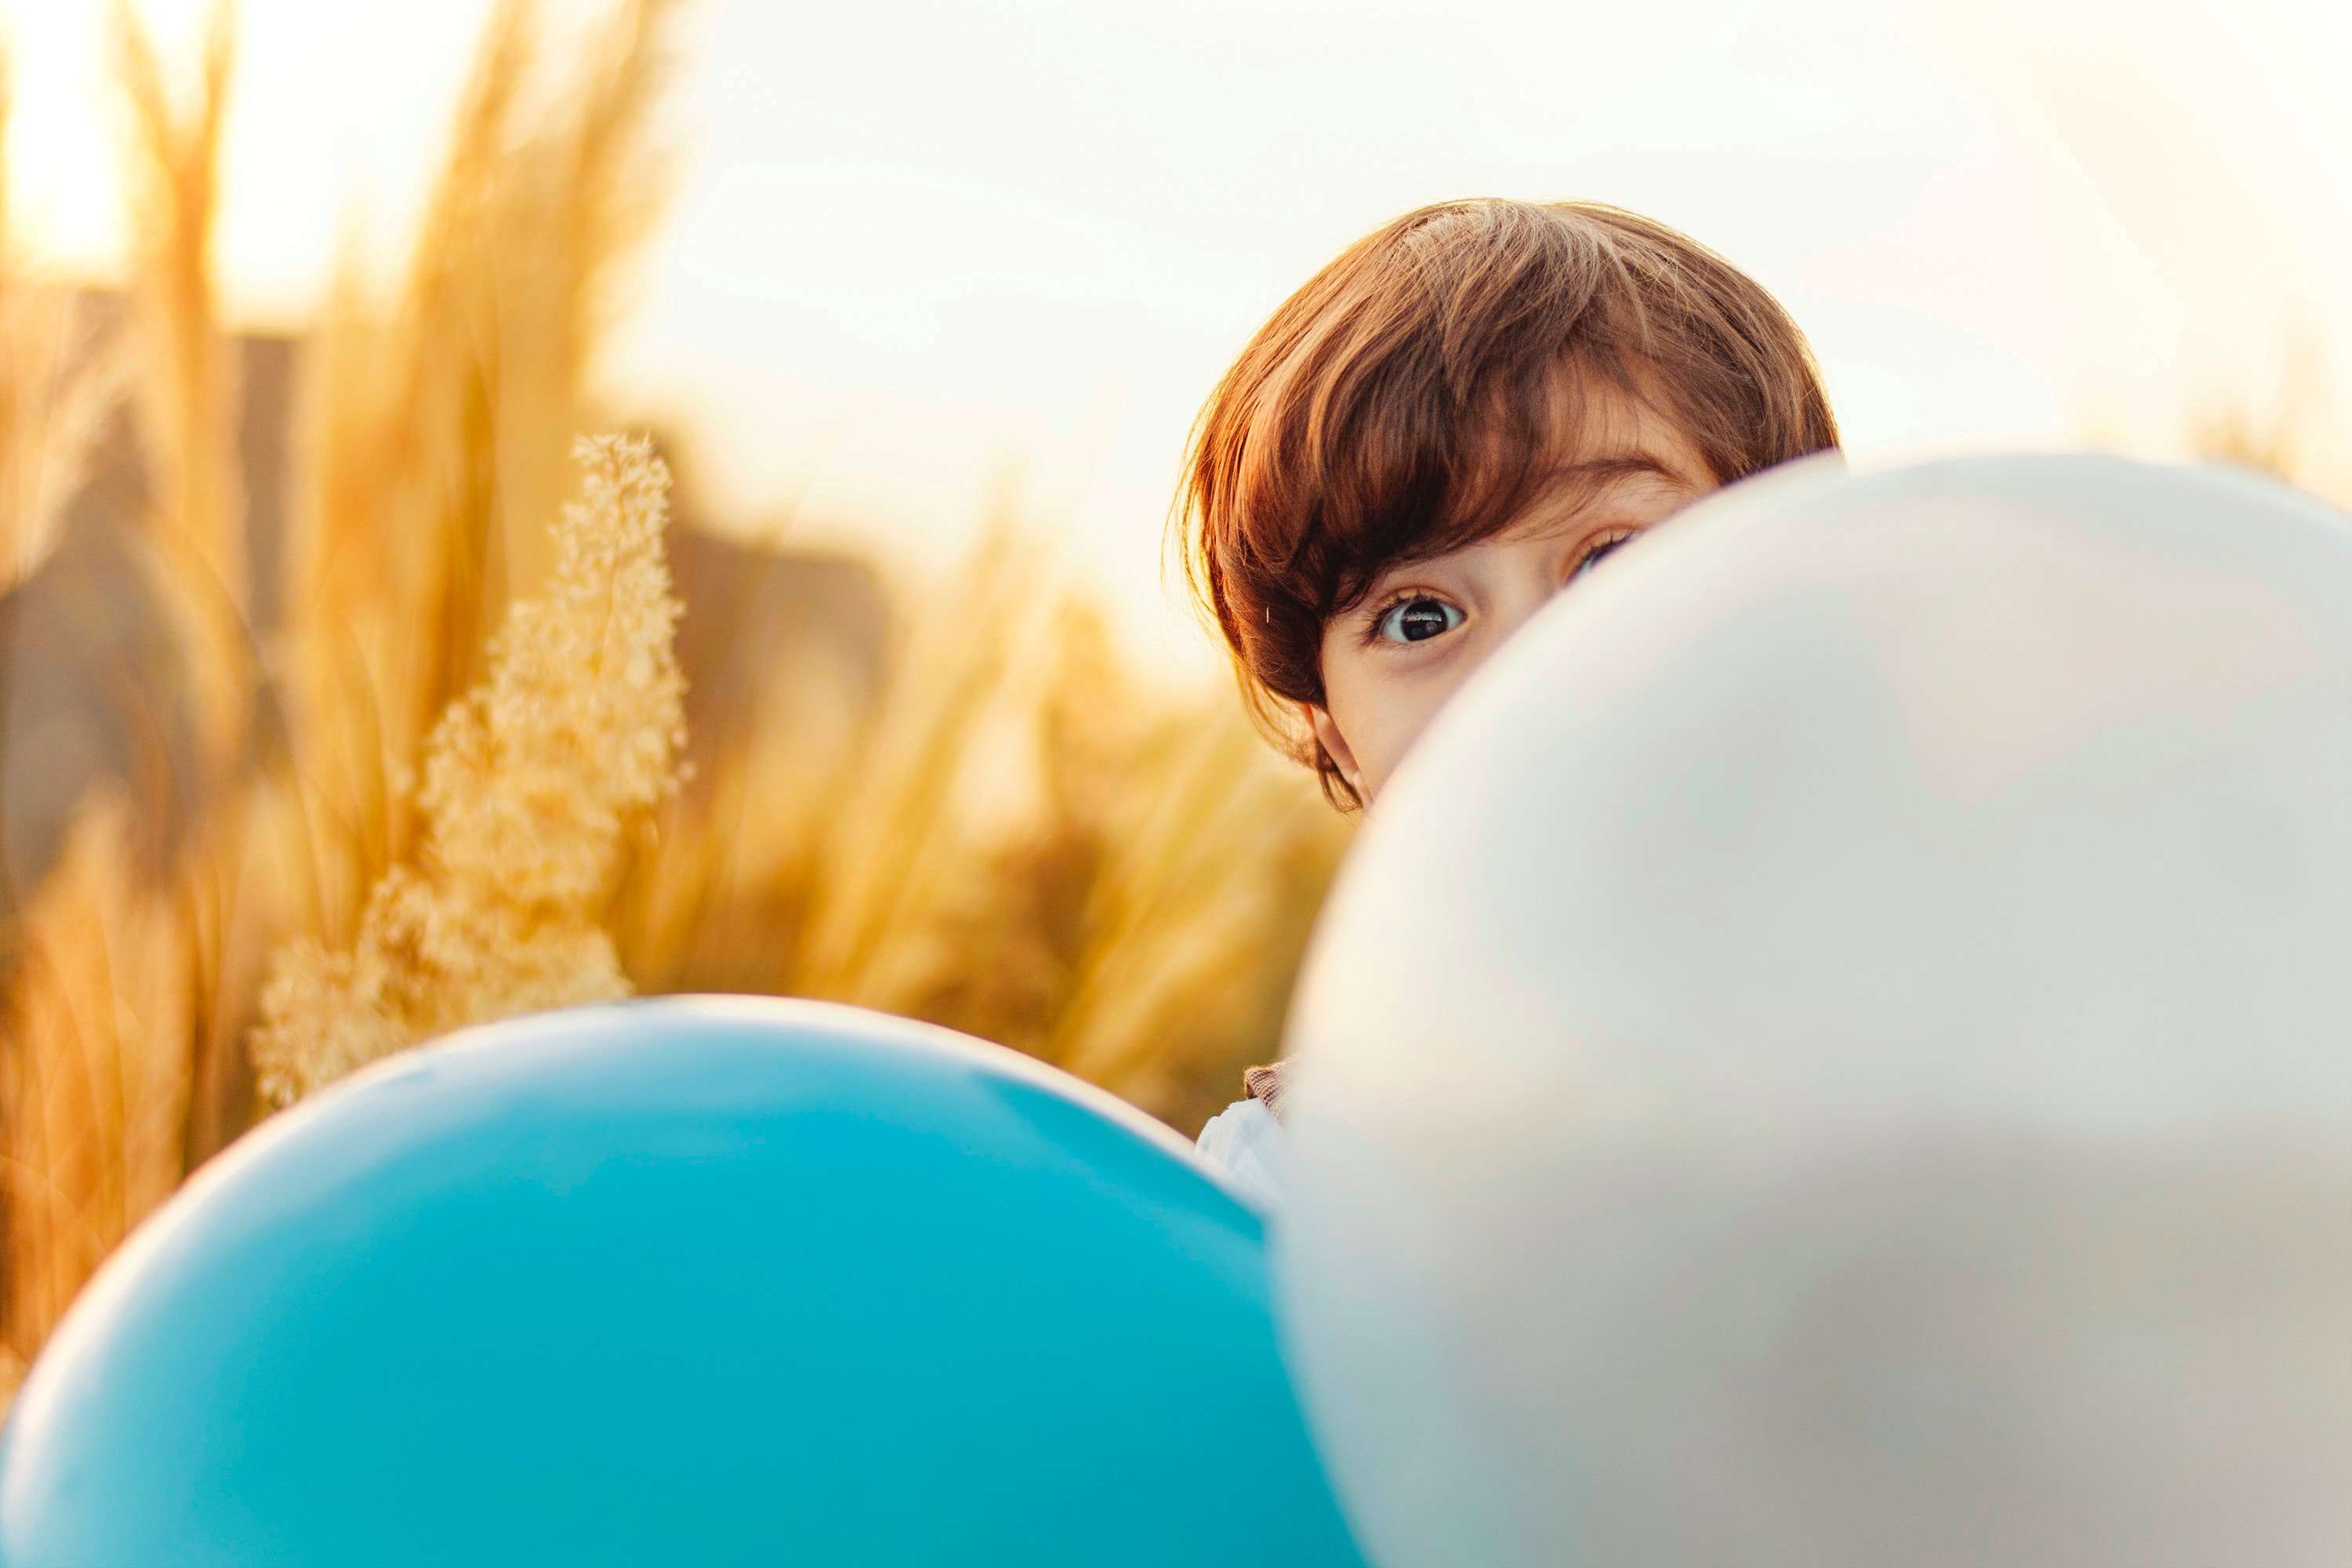 May Recreation Mental Health Month Kids Edition Boy in Wheat Field Hiding Behind Large Baloons